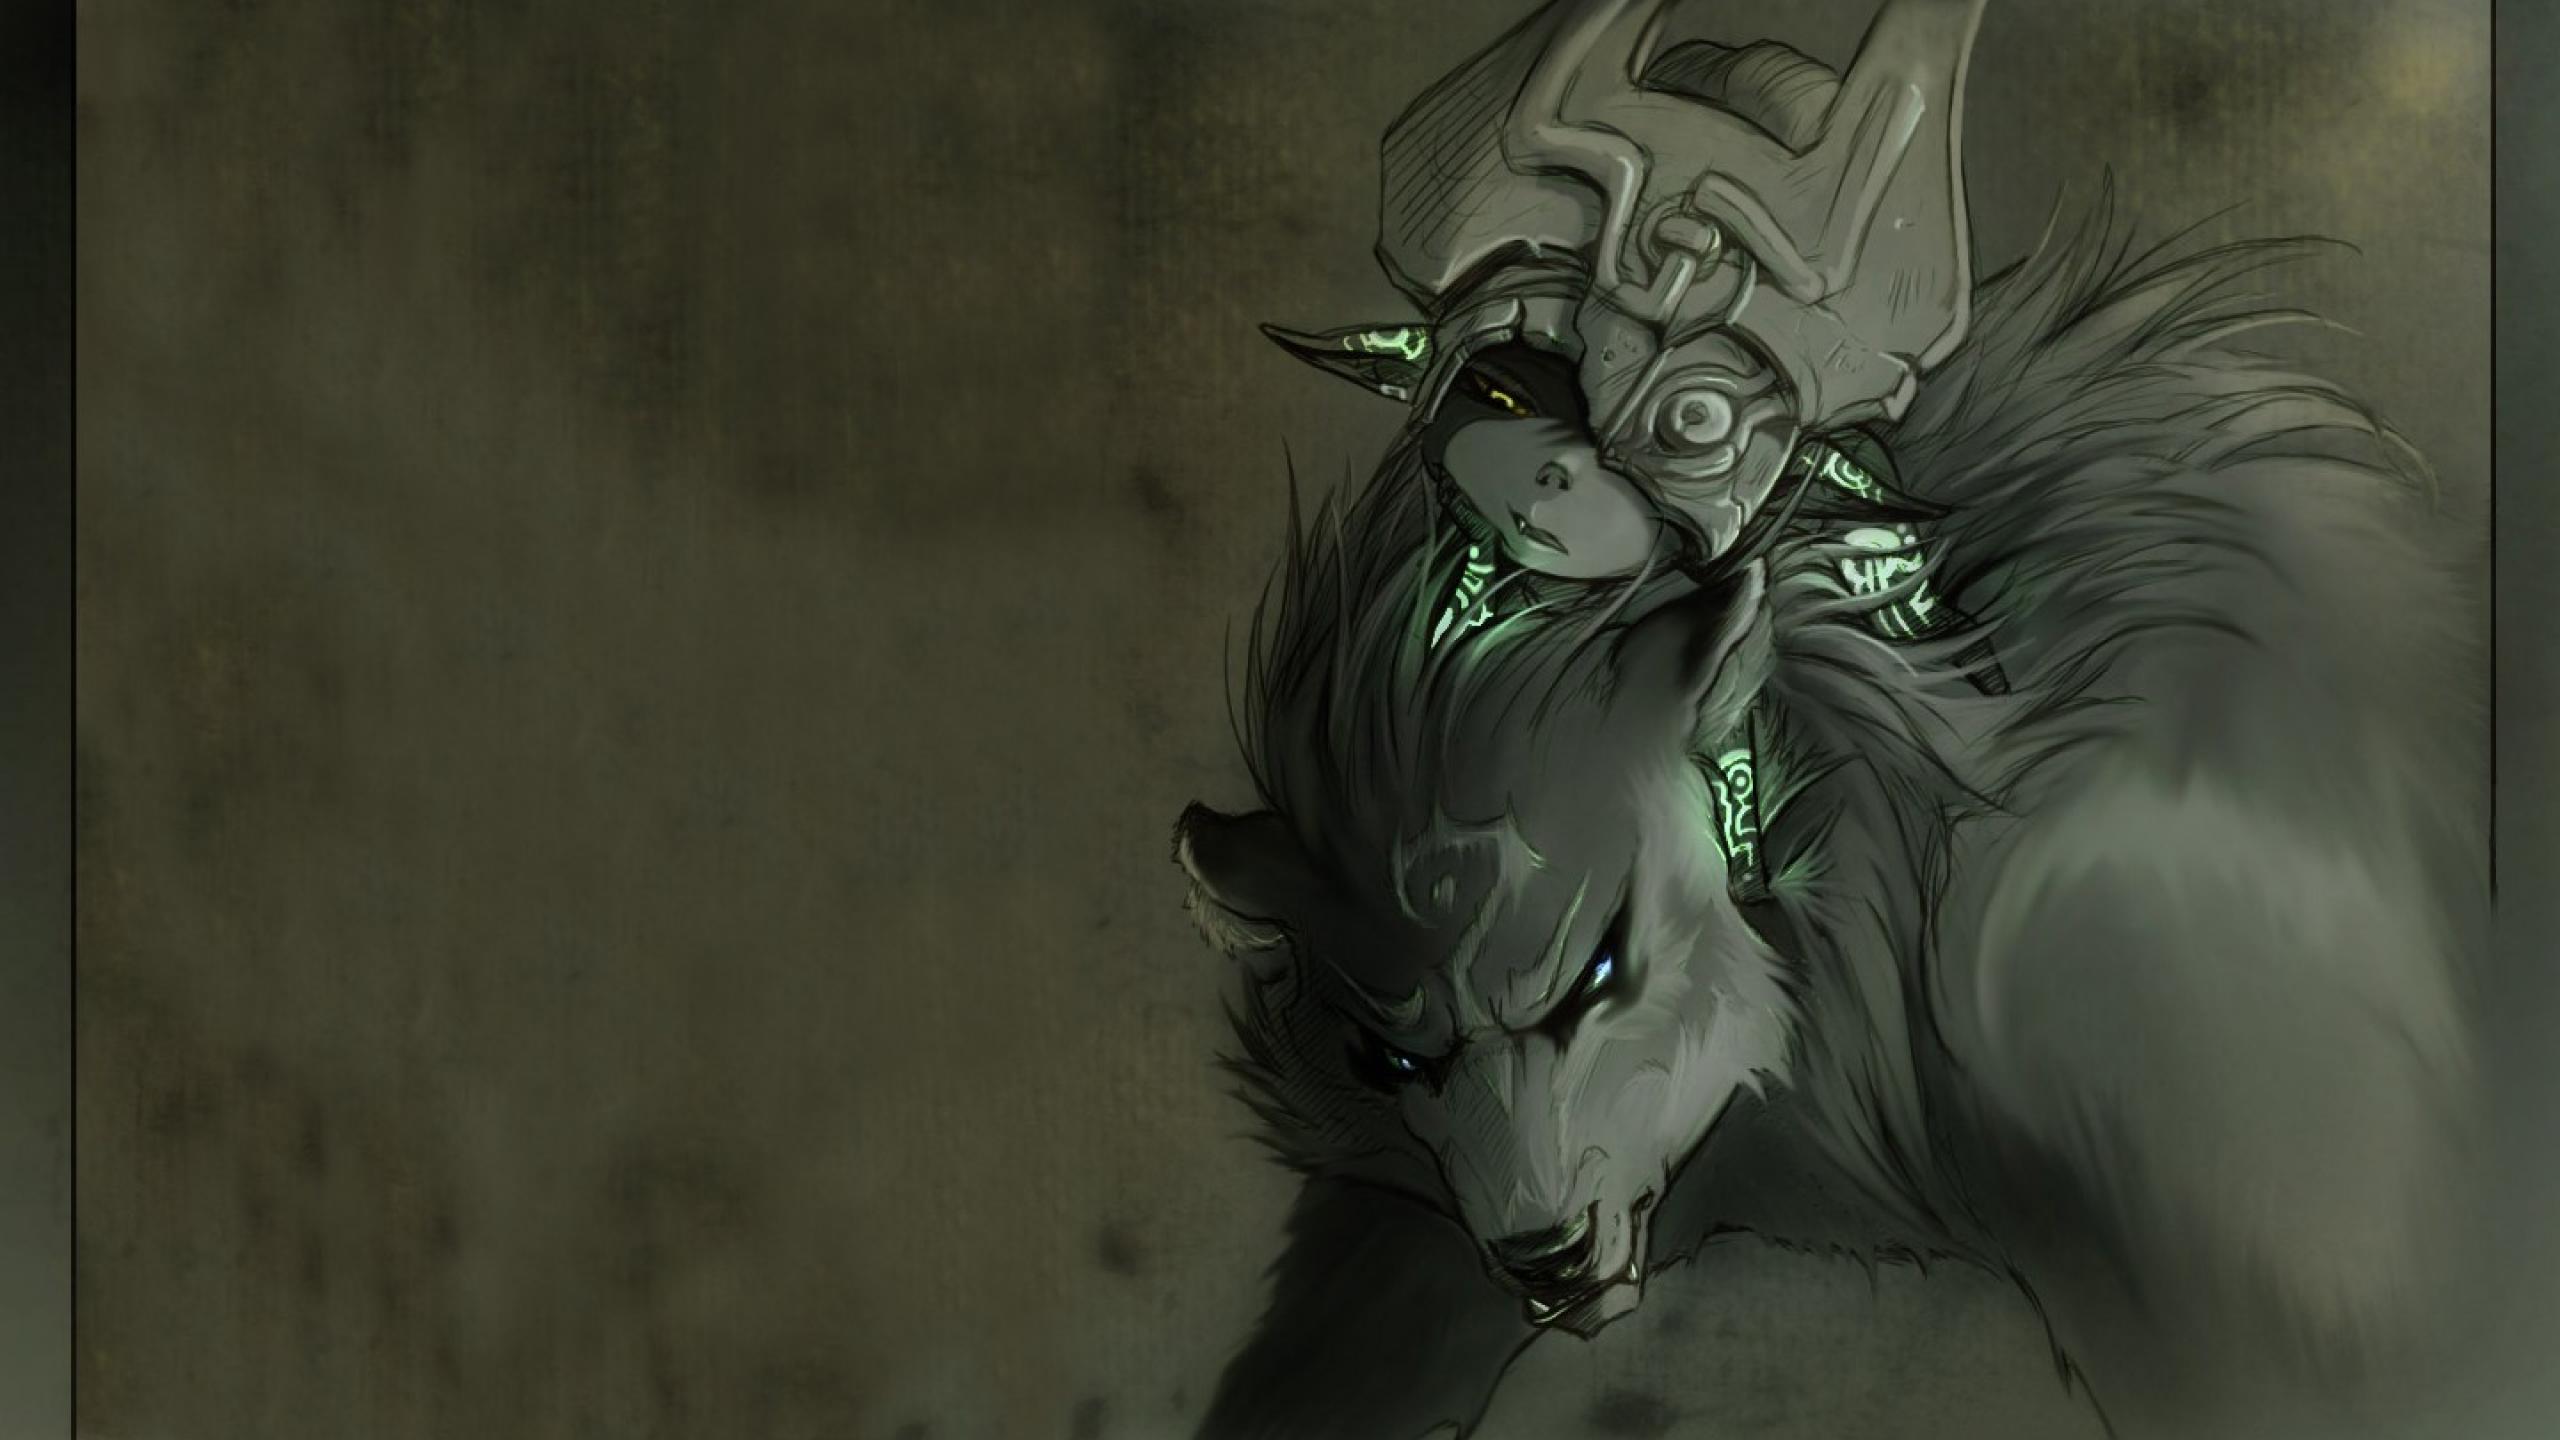 Top Quality HD Twilight Princess Image Cool Collection